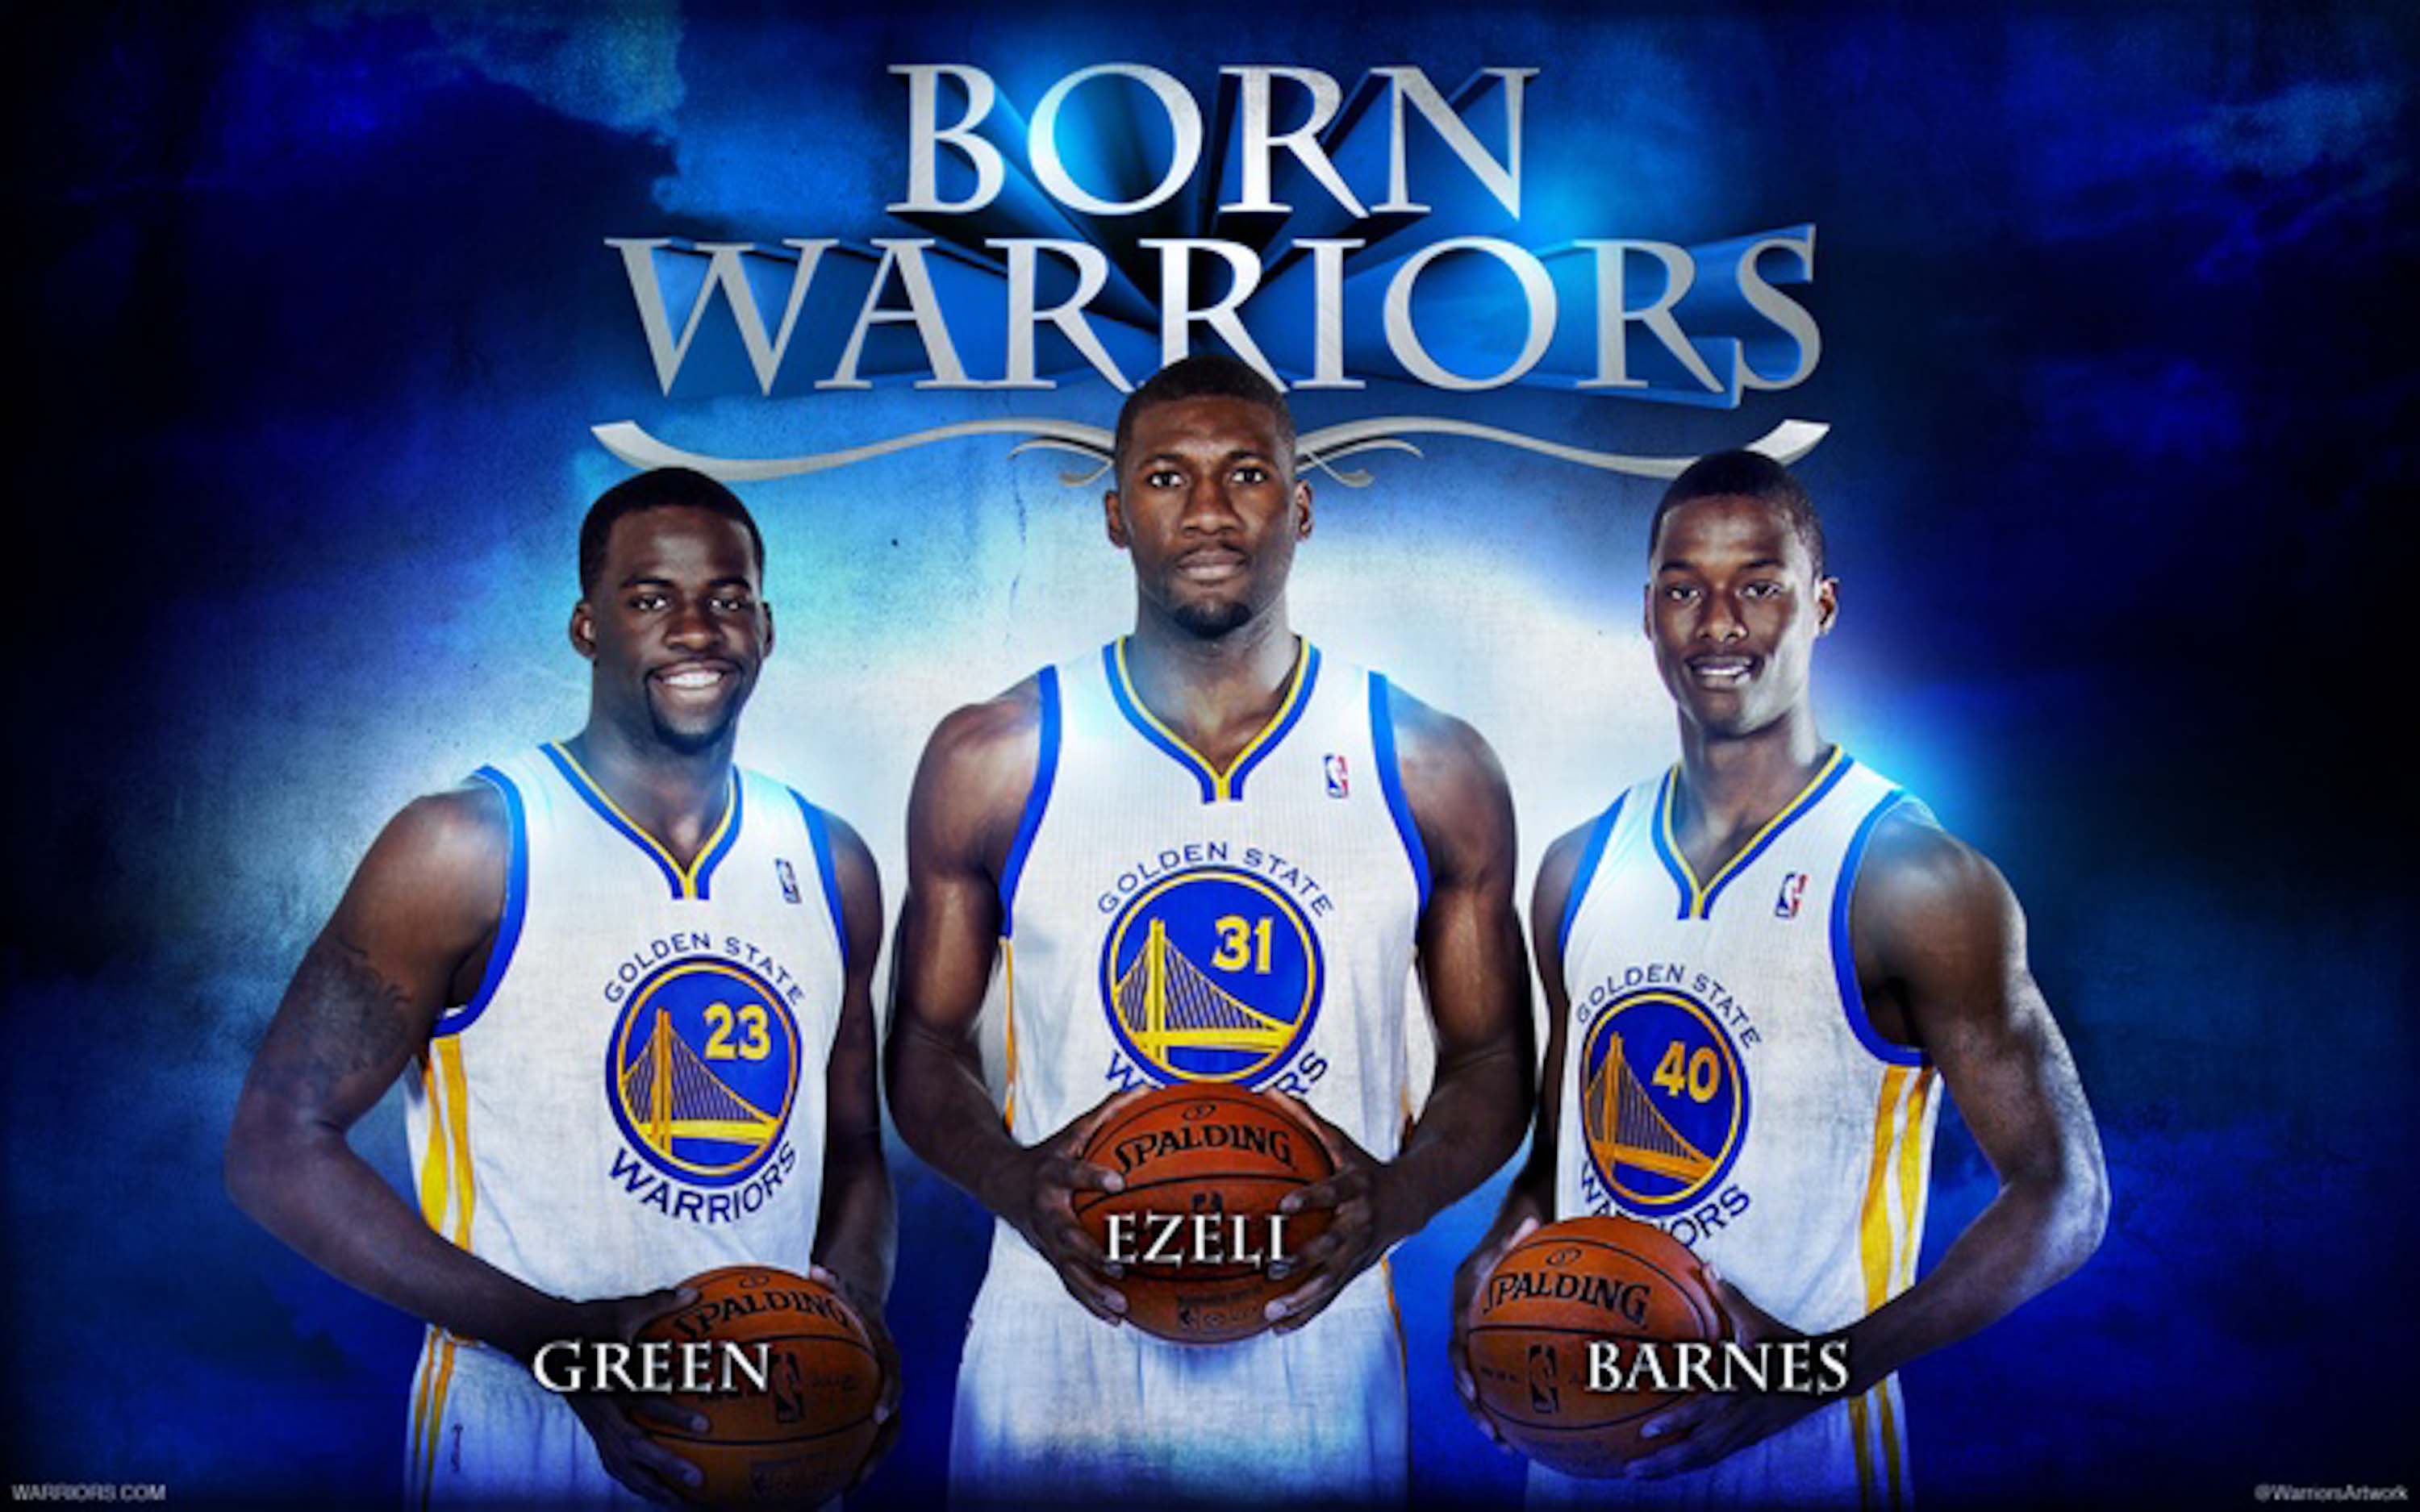 Draymond Green Wallpaper High Resolution and Quality Download